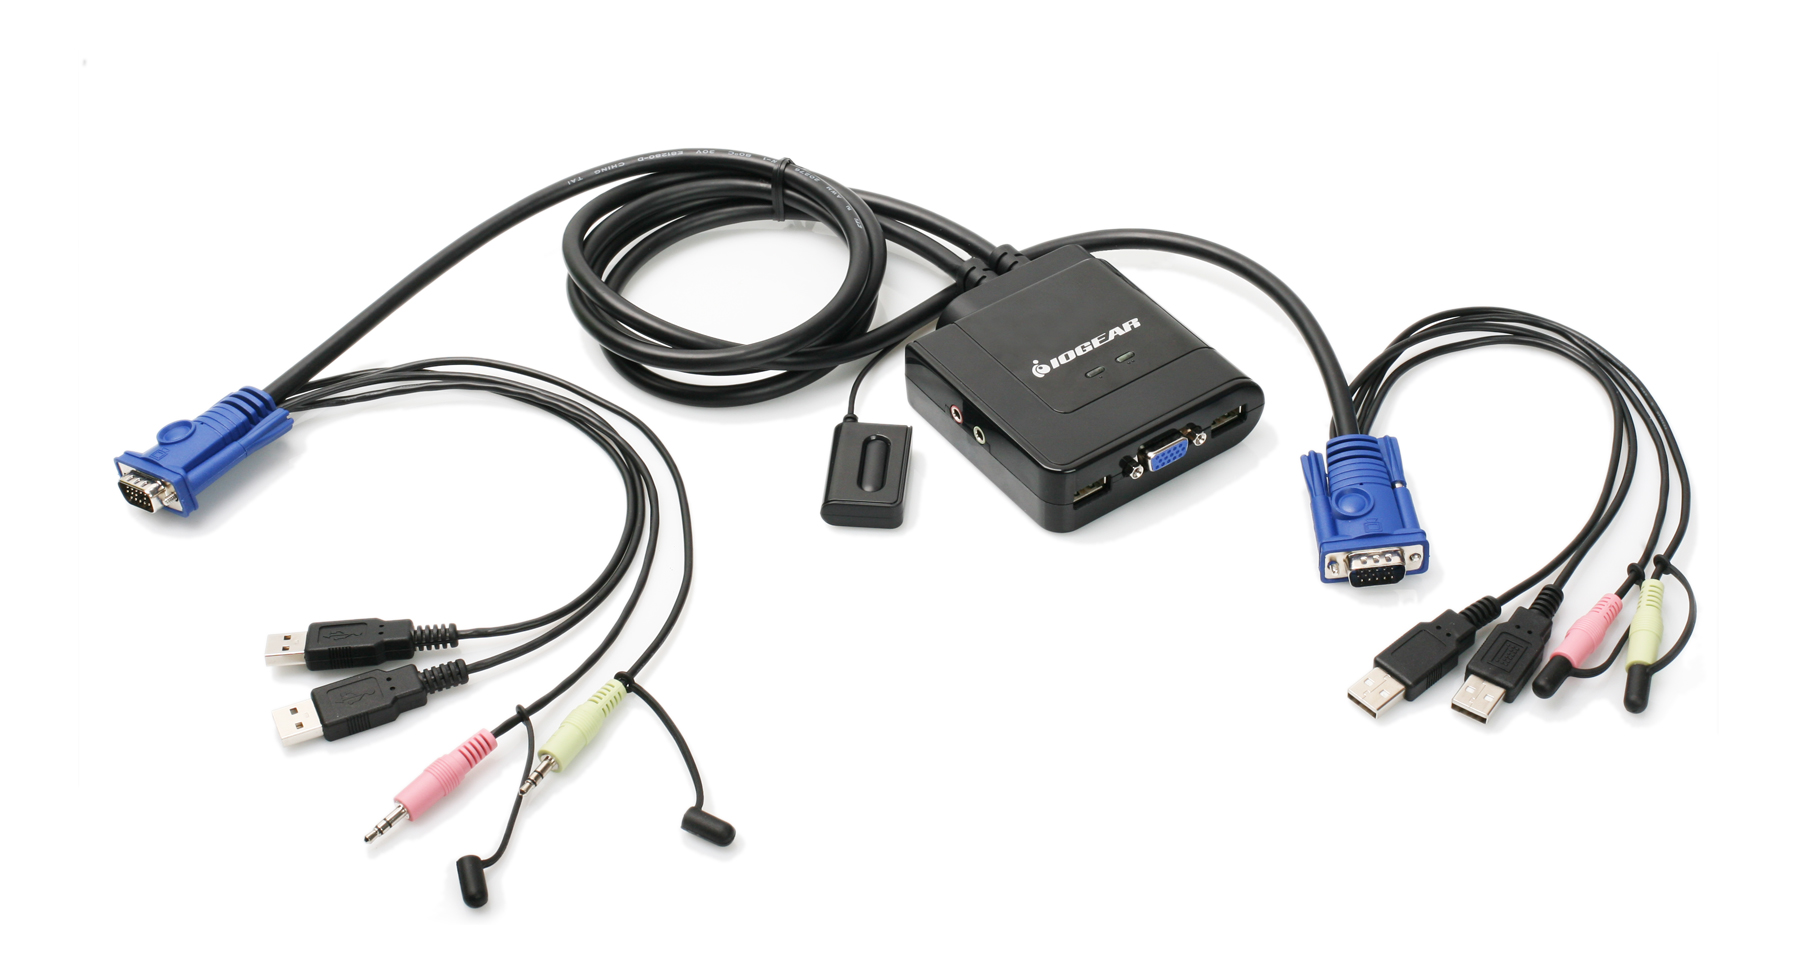 Tripp Lite 2-Port USB VGA Cable KVM Switch with Cables & USB Peripheral Sharing B032-VU2 2048 x 1536 